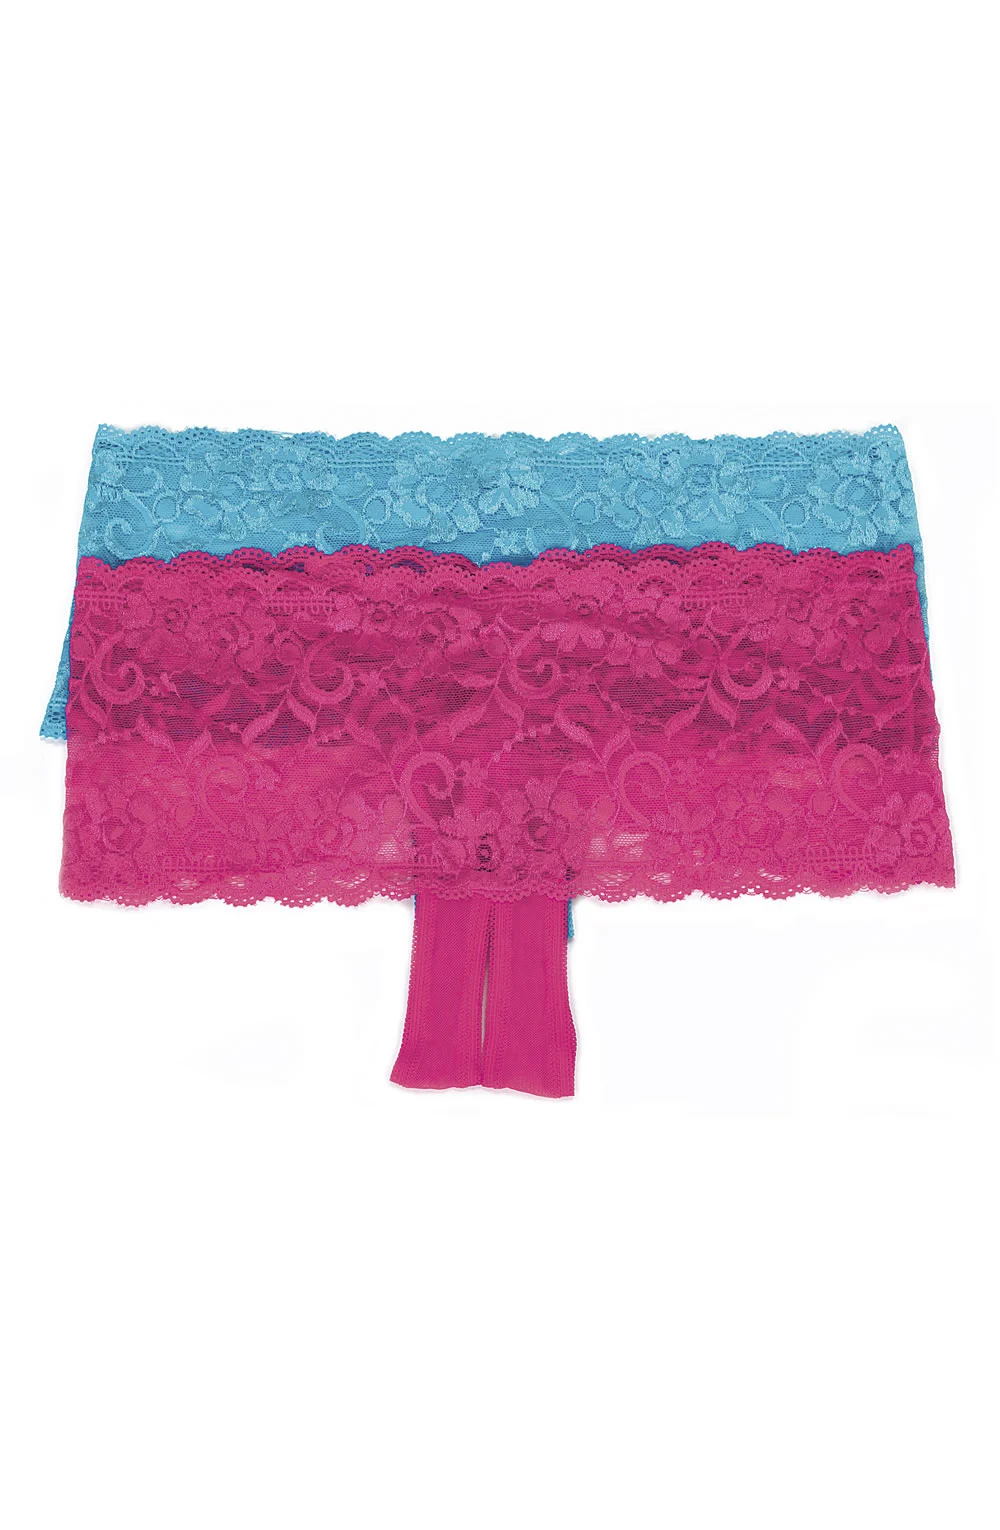 image of Shirley of Hollywood 59 Turquoise Lace Boy Short - Sexy and Stretchy